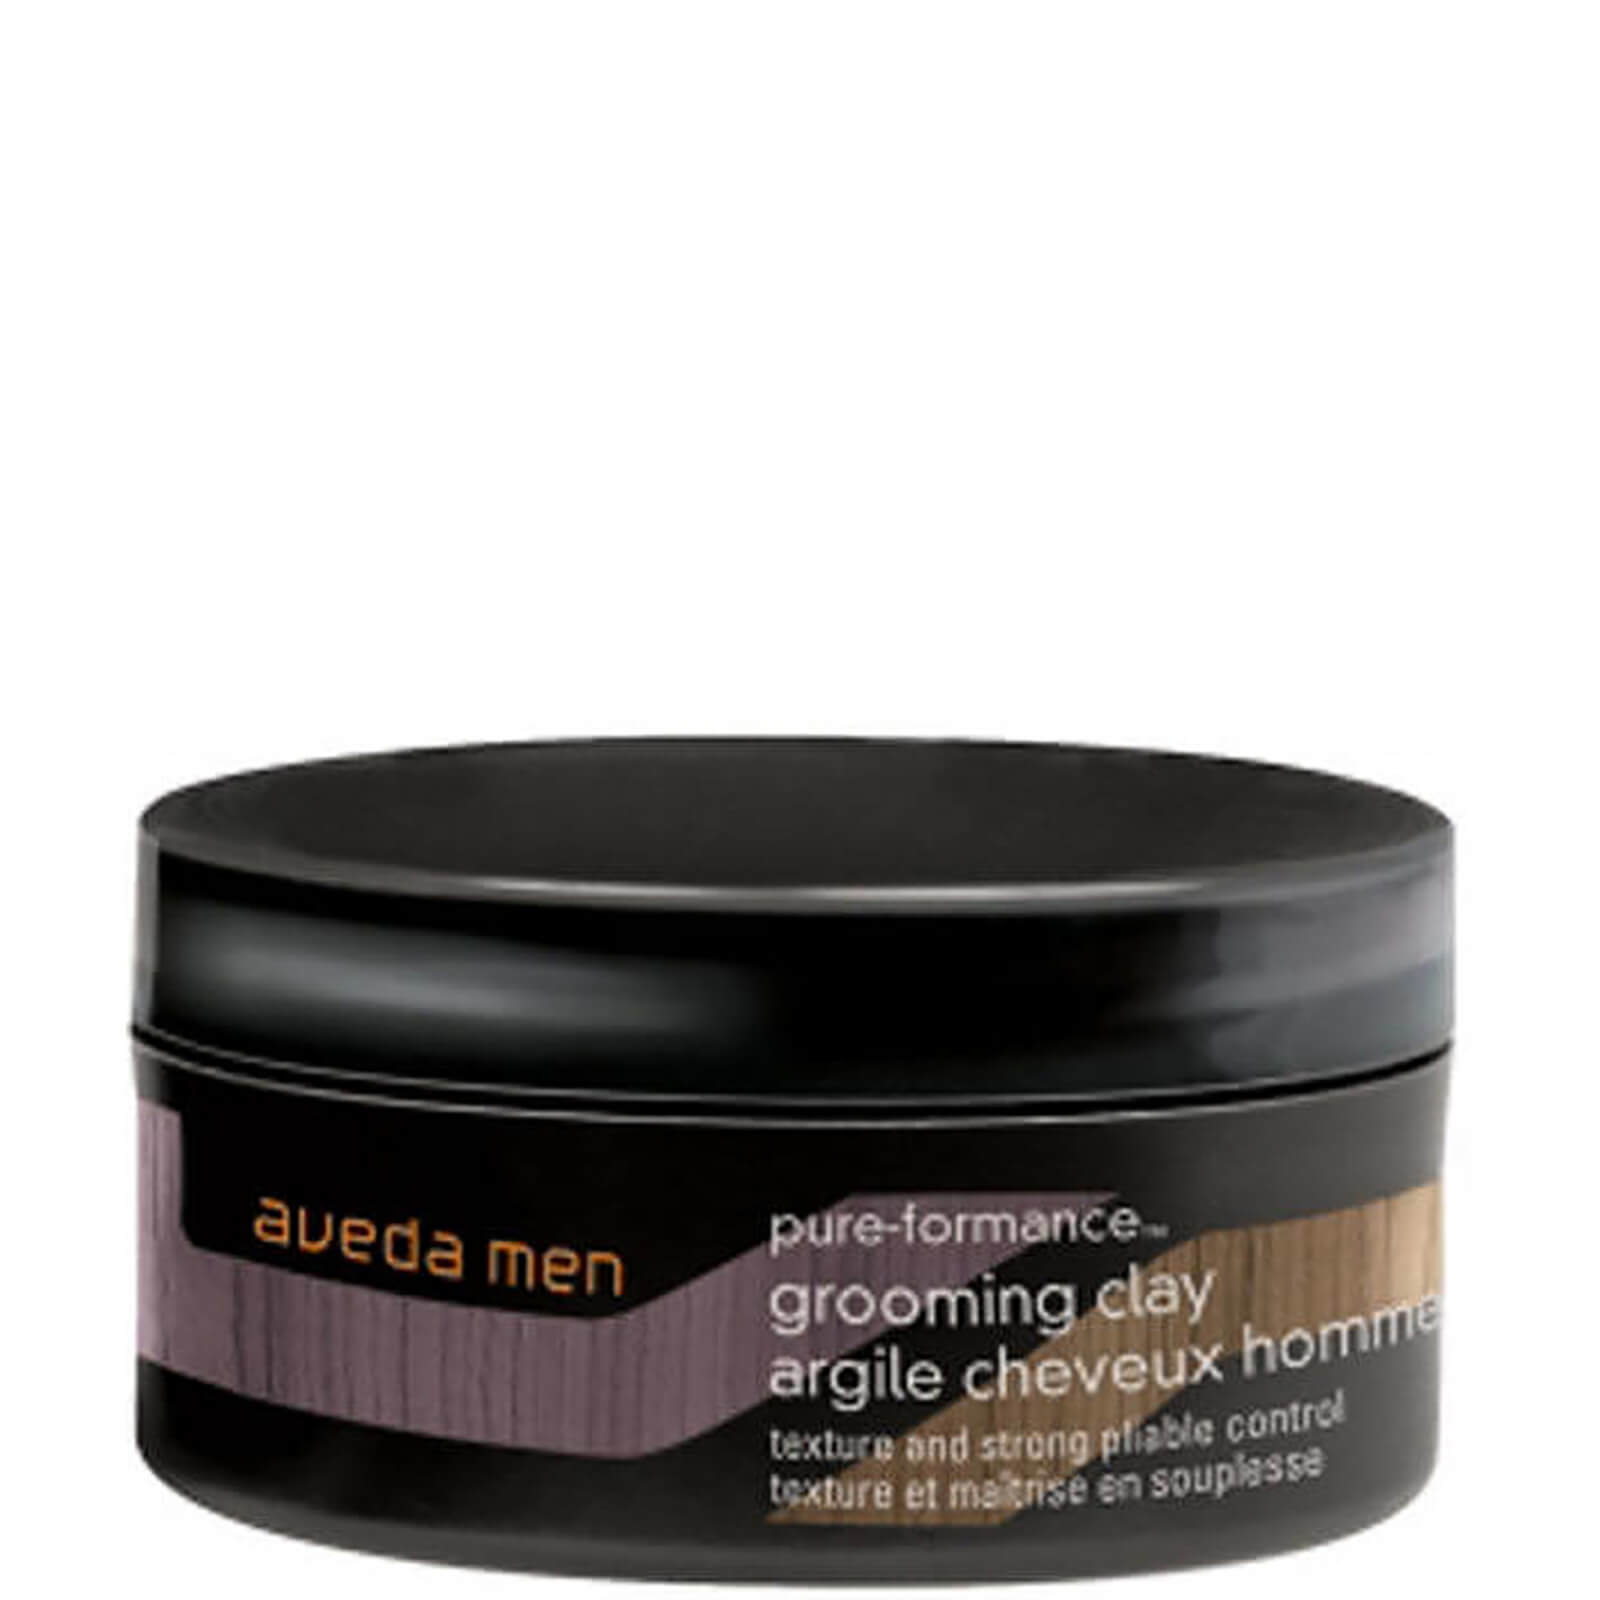 Image of Aveda Mens Pure-Formance Grooming Clay (75ml)